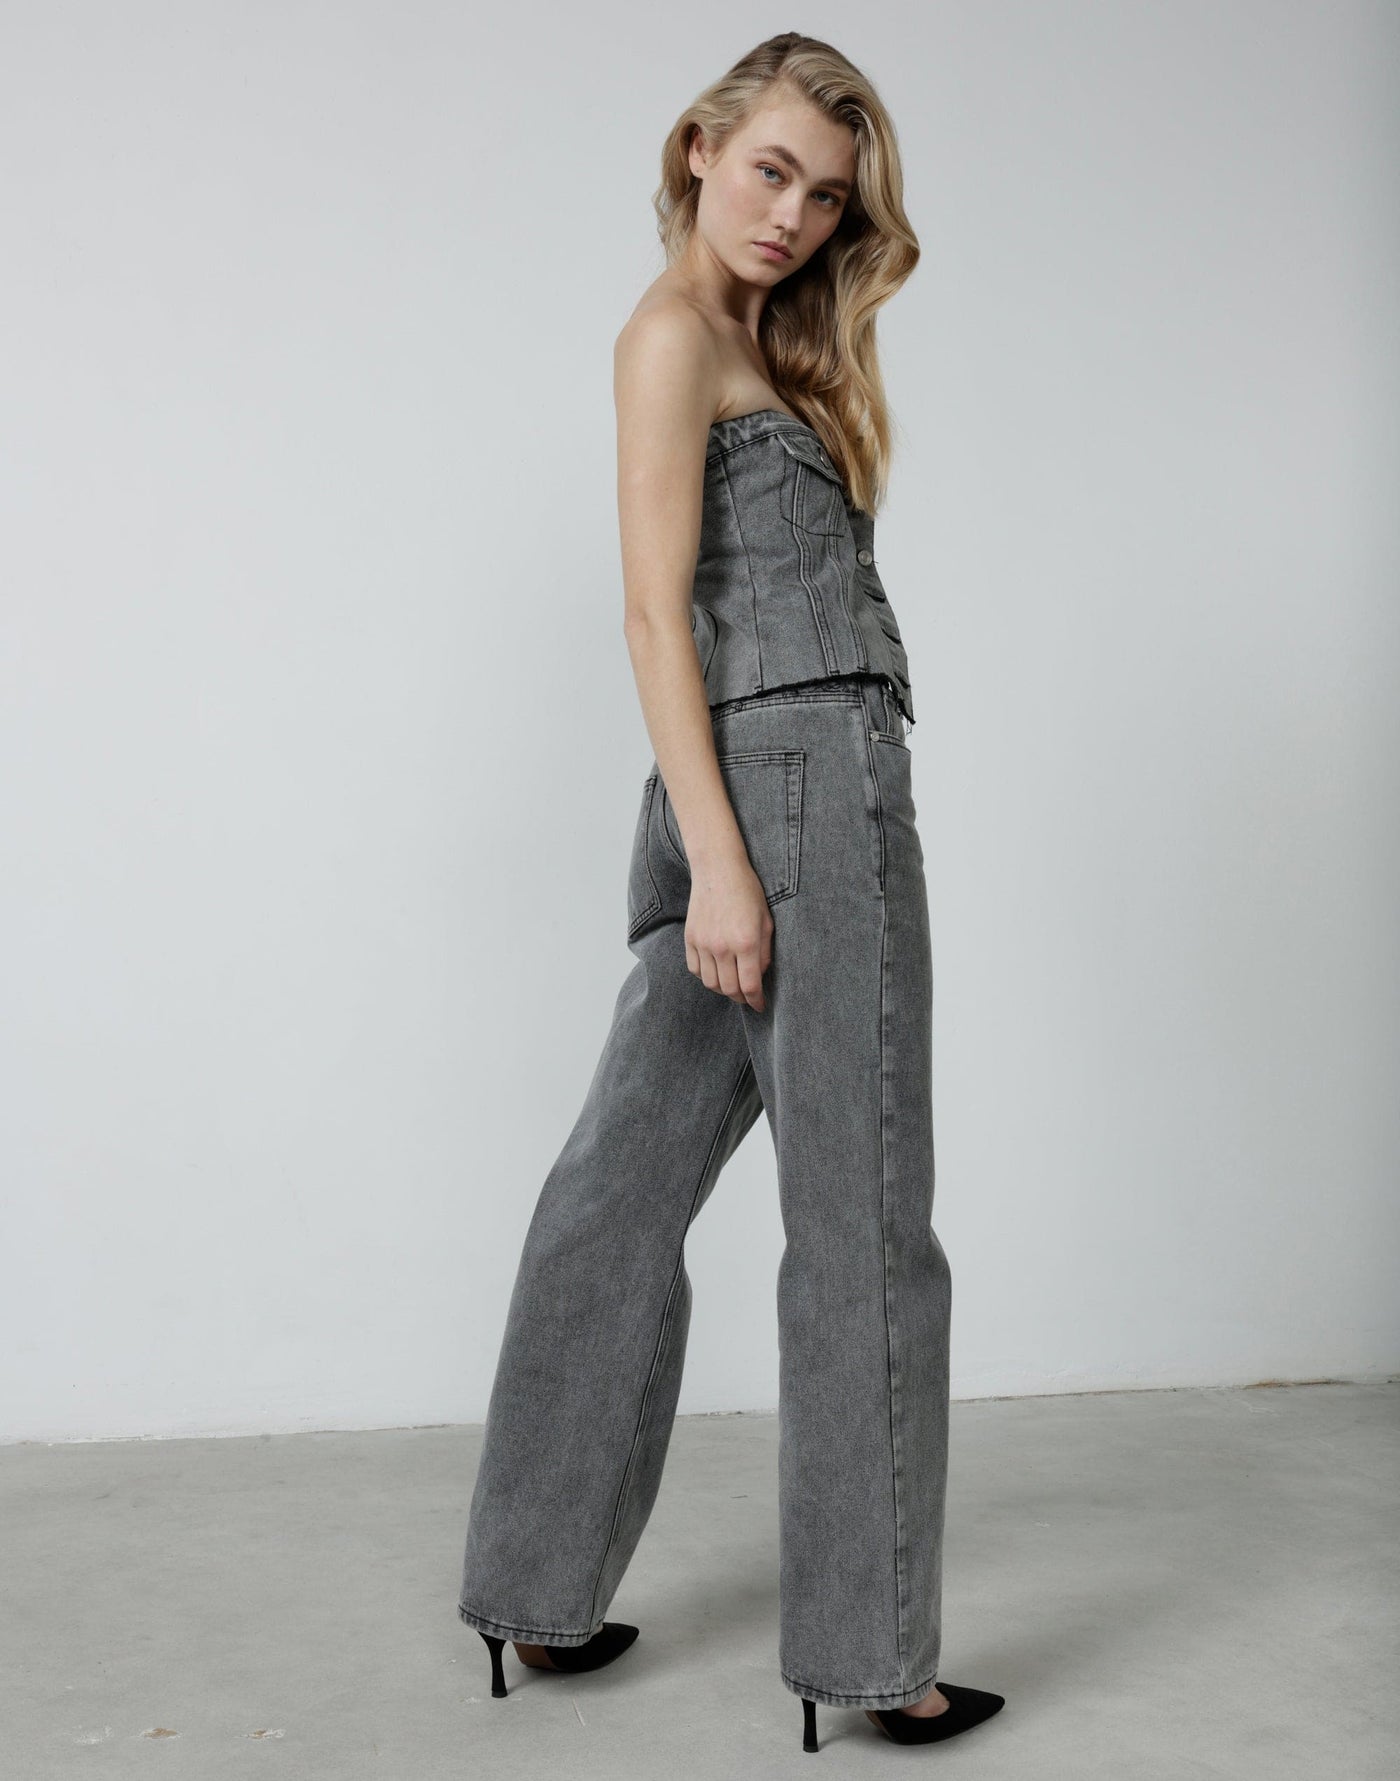 Easton Jeans (Acid Wash) - Grey Acid Wash Denim Low/Mid Rise Relaxed Jean - Women's Pants - Charcoal Clothing